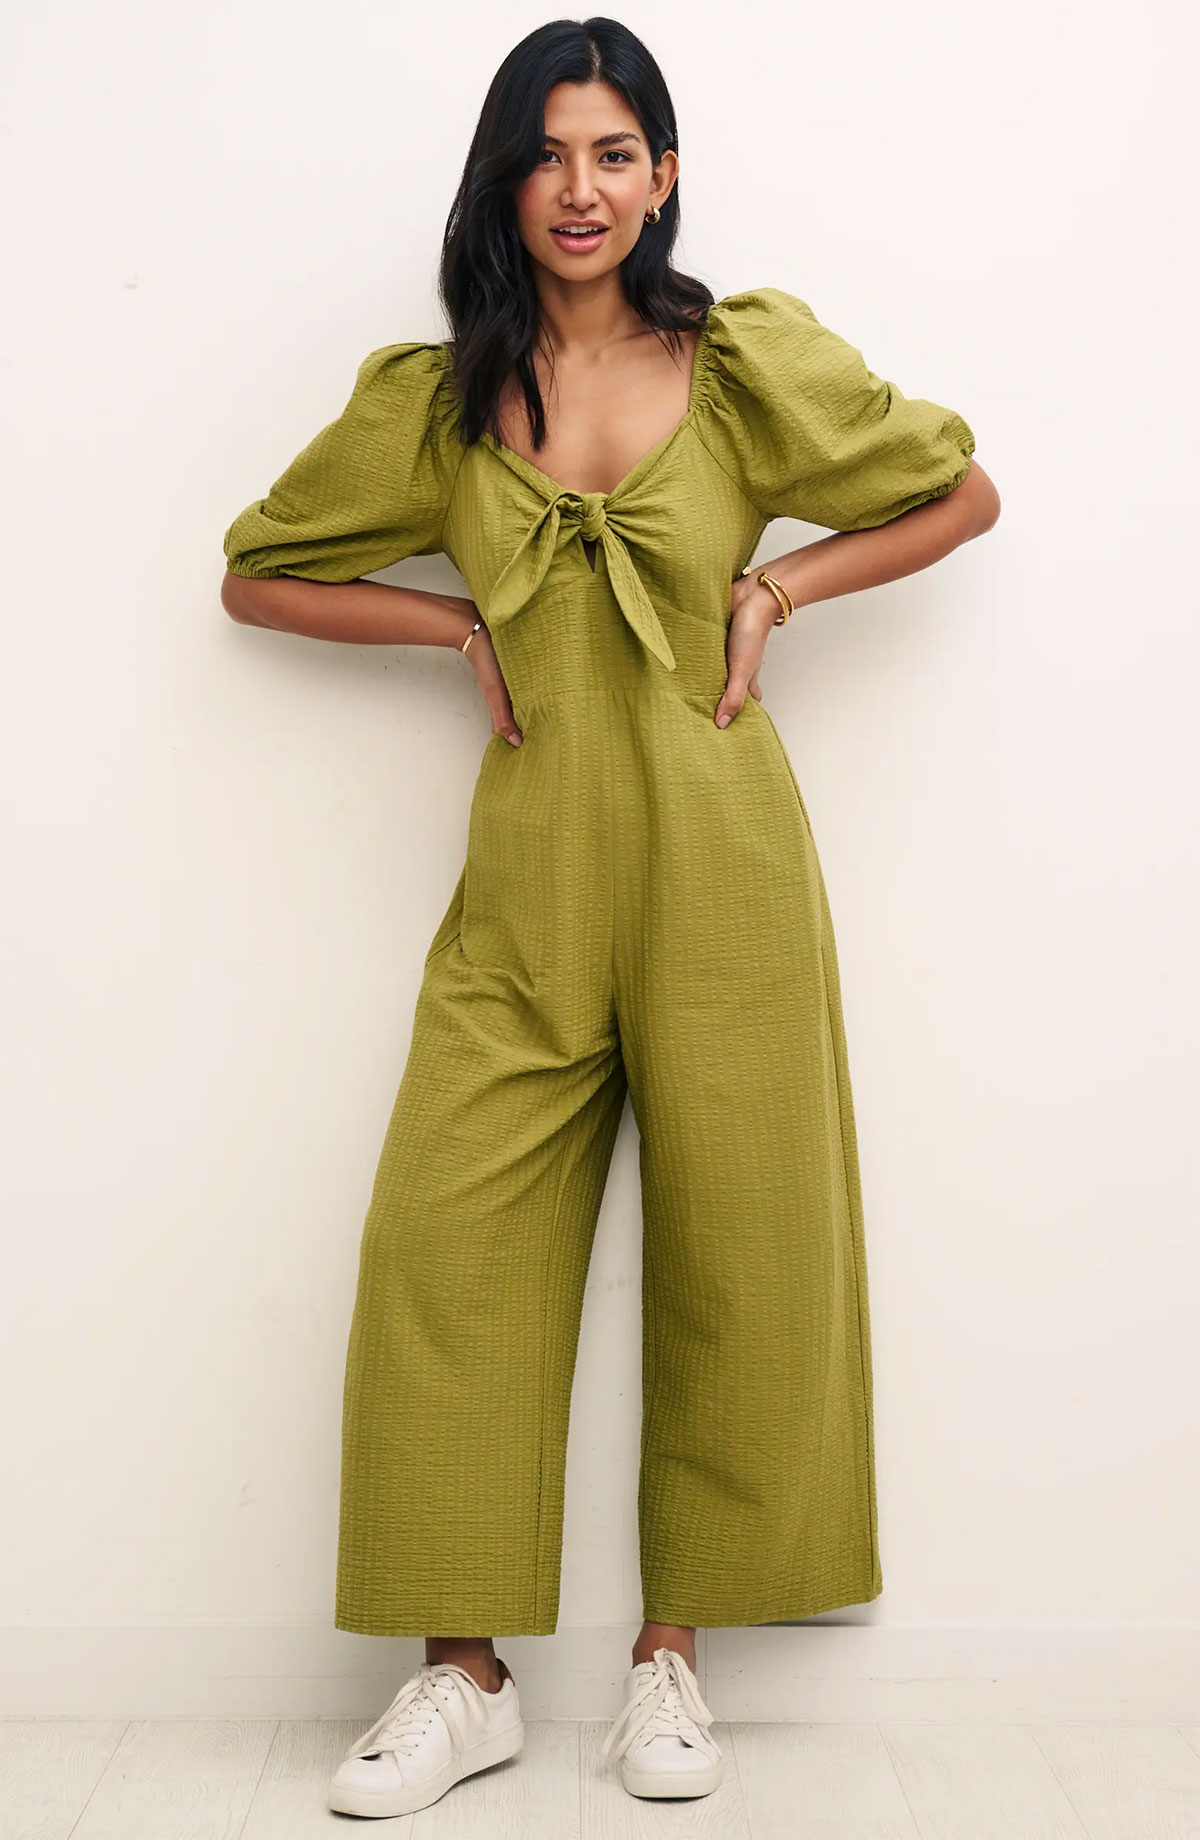 This green seersucker sustainable jumpsuit from Nobody's Child is made with organic cotton and EcoVero viscose.